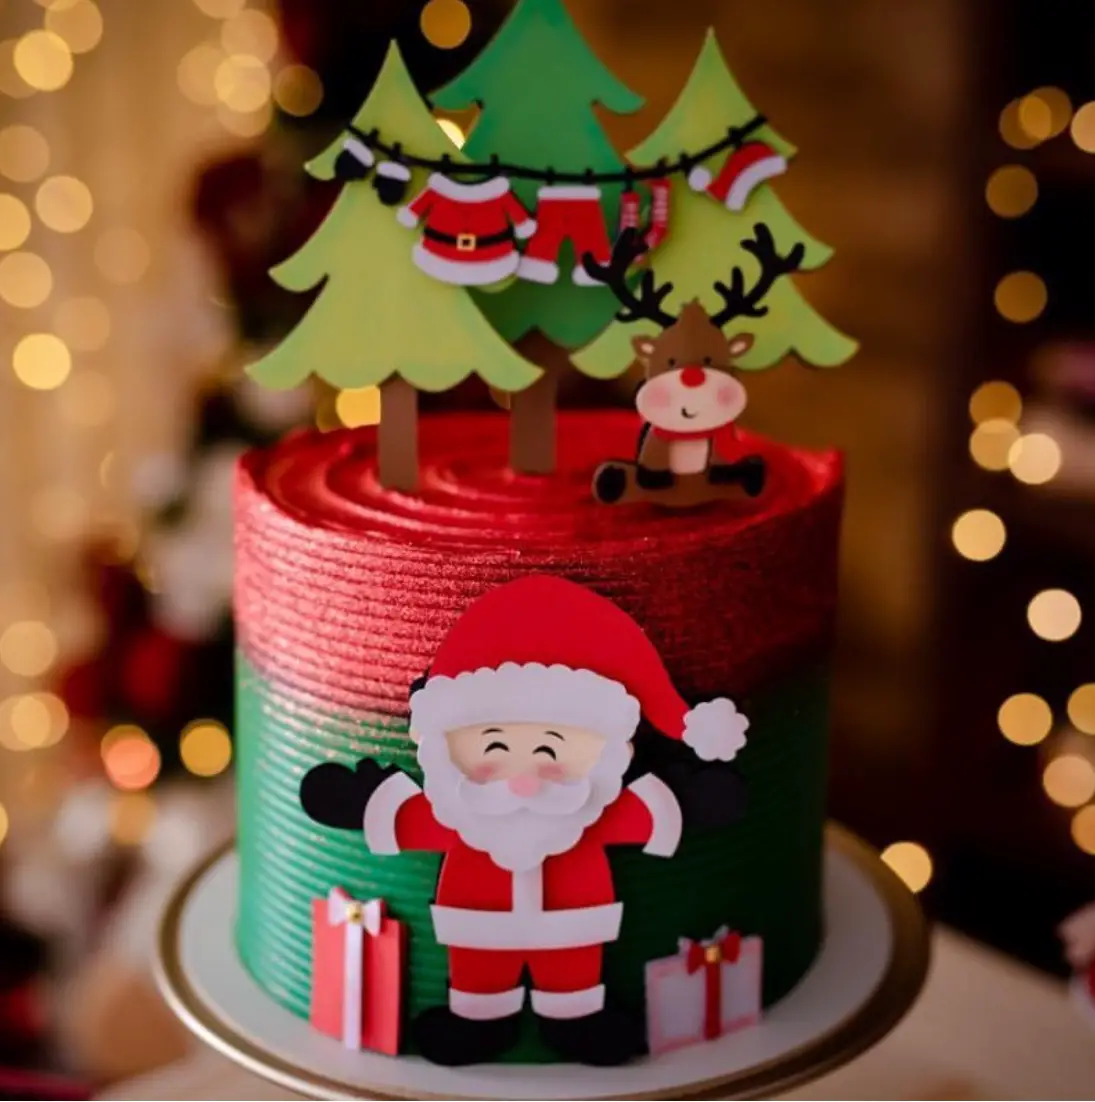 20+ Easy Christmas Cake Designs For The Holidays - The Wonder Cottage